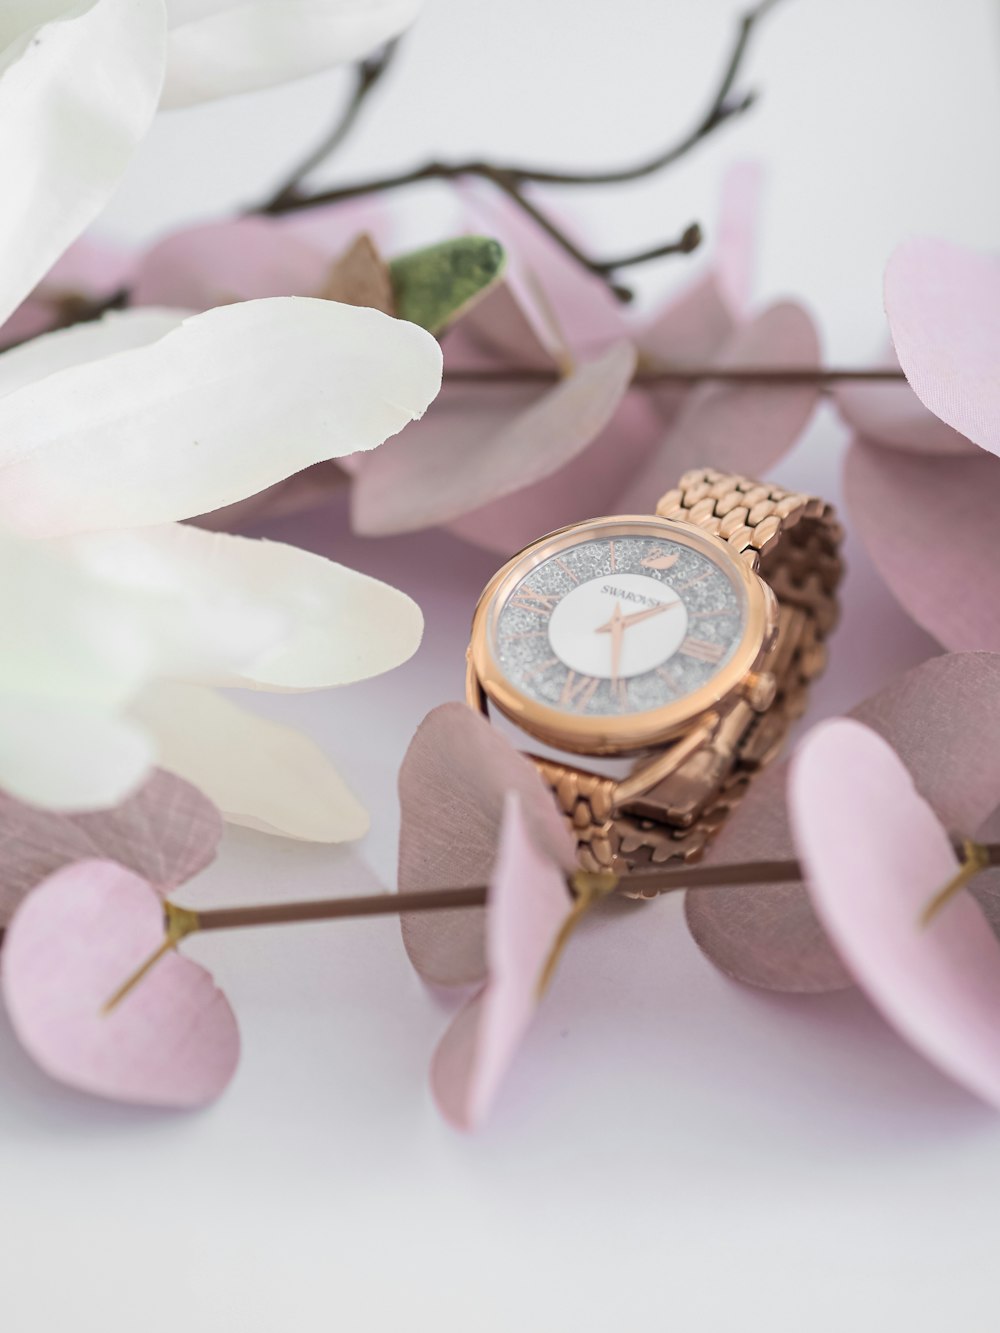 gold and white analog watch on white flower